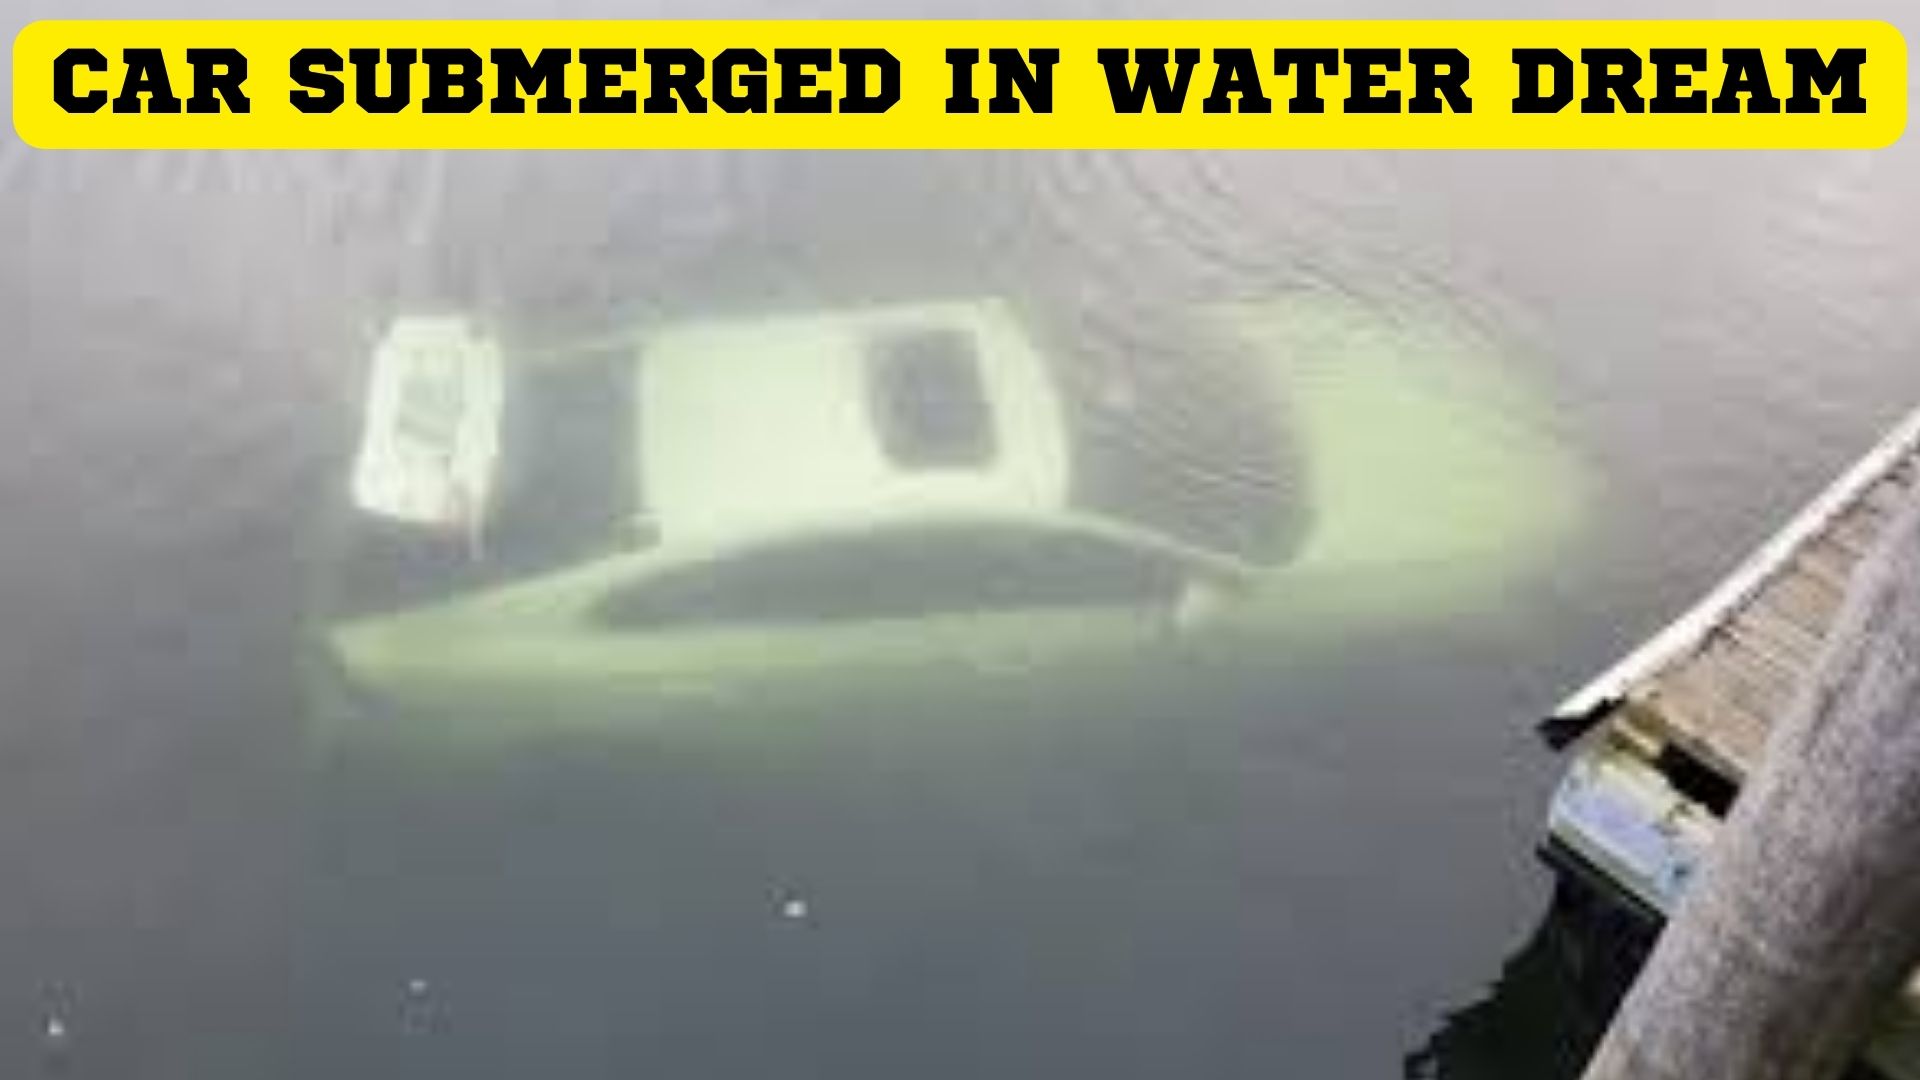 Car Submerged In Water Dream - It Symbolizes Bravery